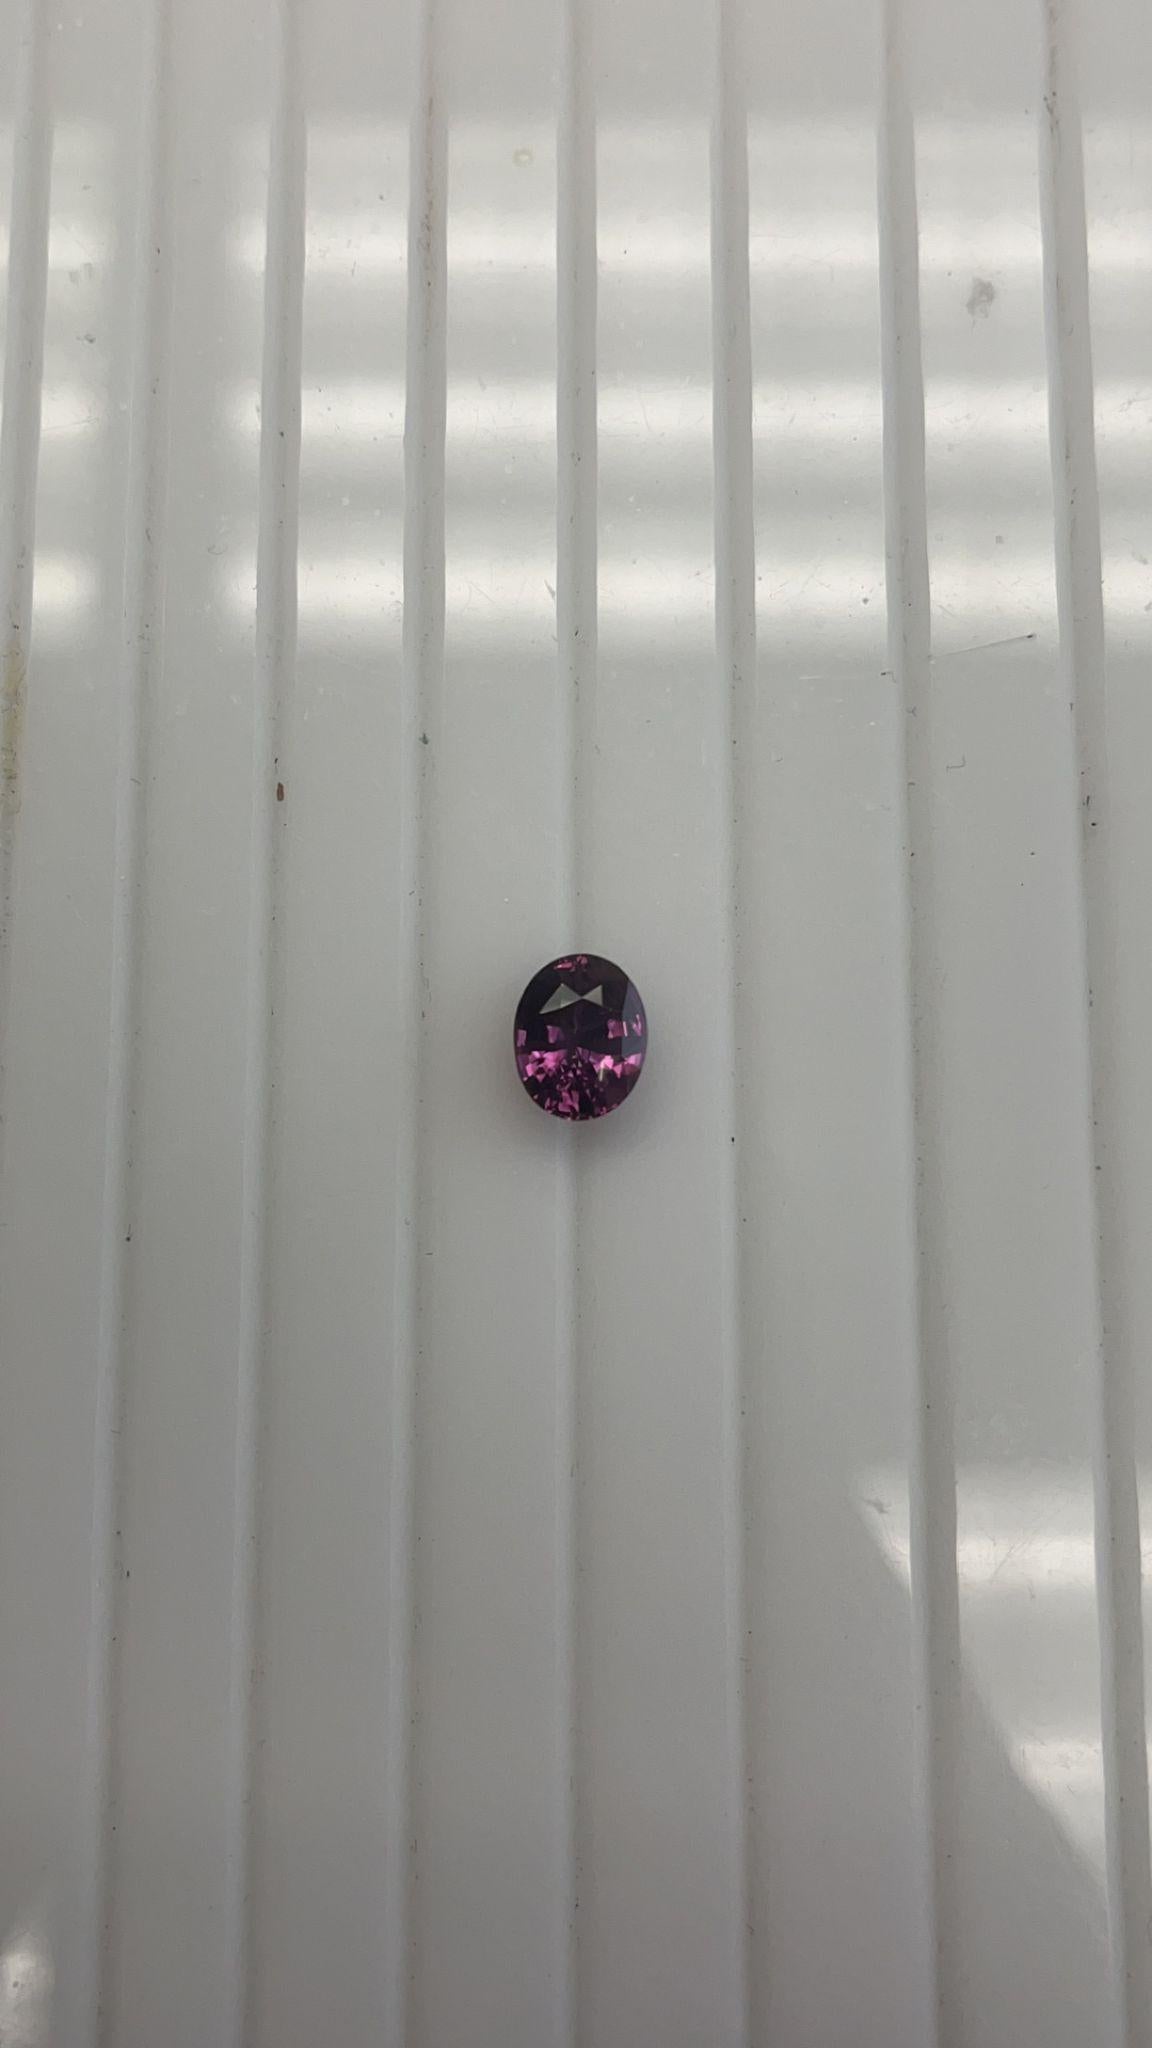 GIA Certified Oval Purplish Pink Sapphire weighing 3.08 carats
Measuring (9.55x7.58x5.22) mm
No indications of heating
